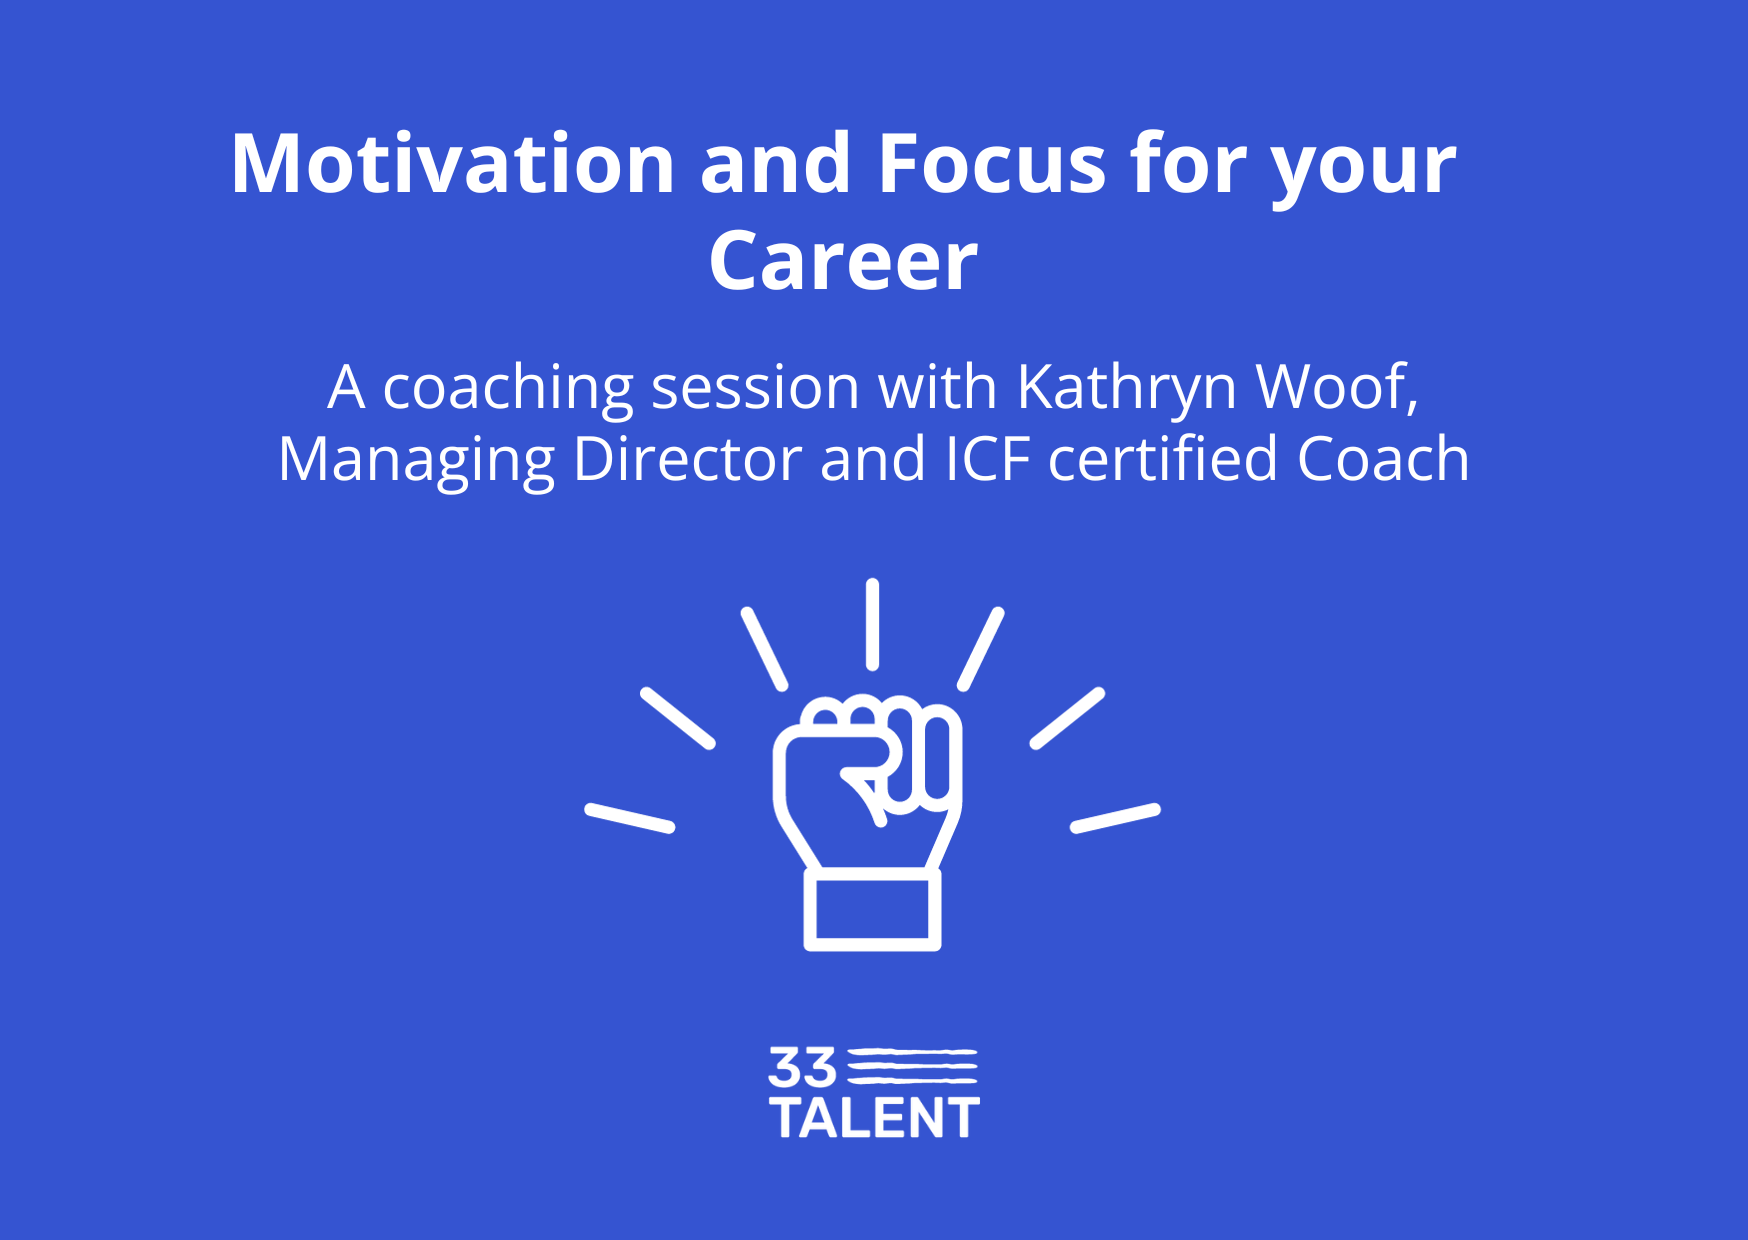 Video: Motivation And Focus For Your Career